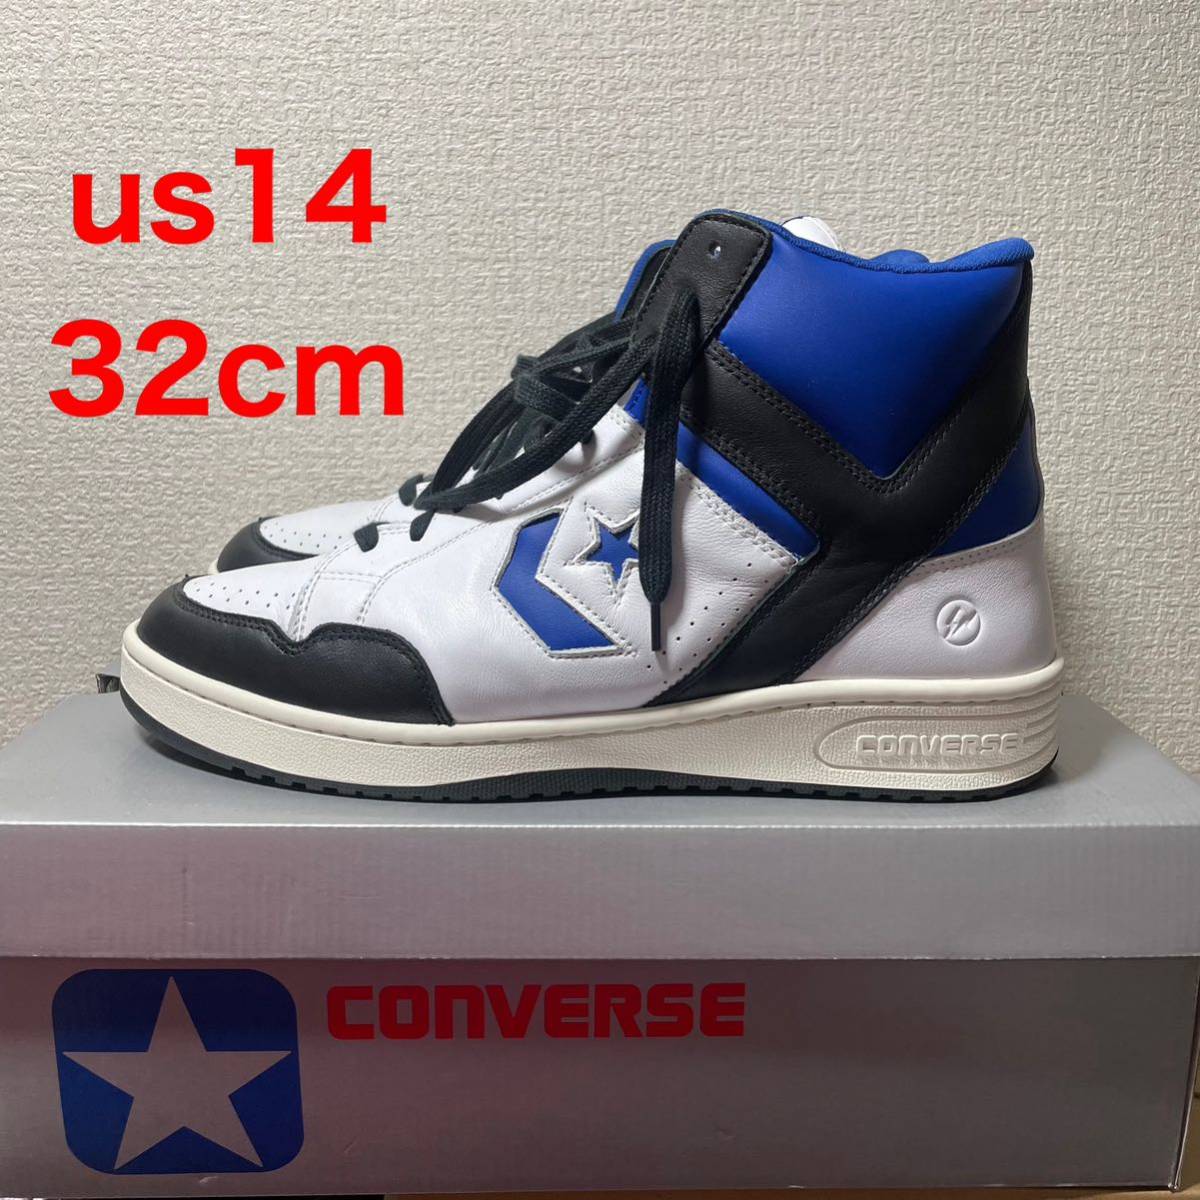 US14 フラグメント コンバース ウェポン ミッド A06083C-102 Fragment converse weapon sequel 32cm_画像1